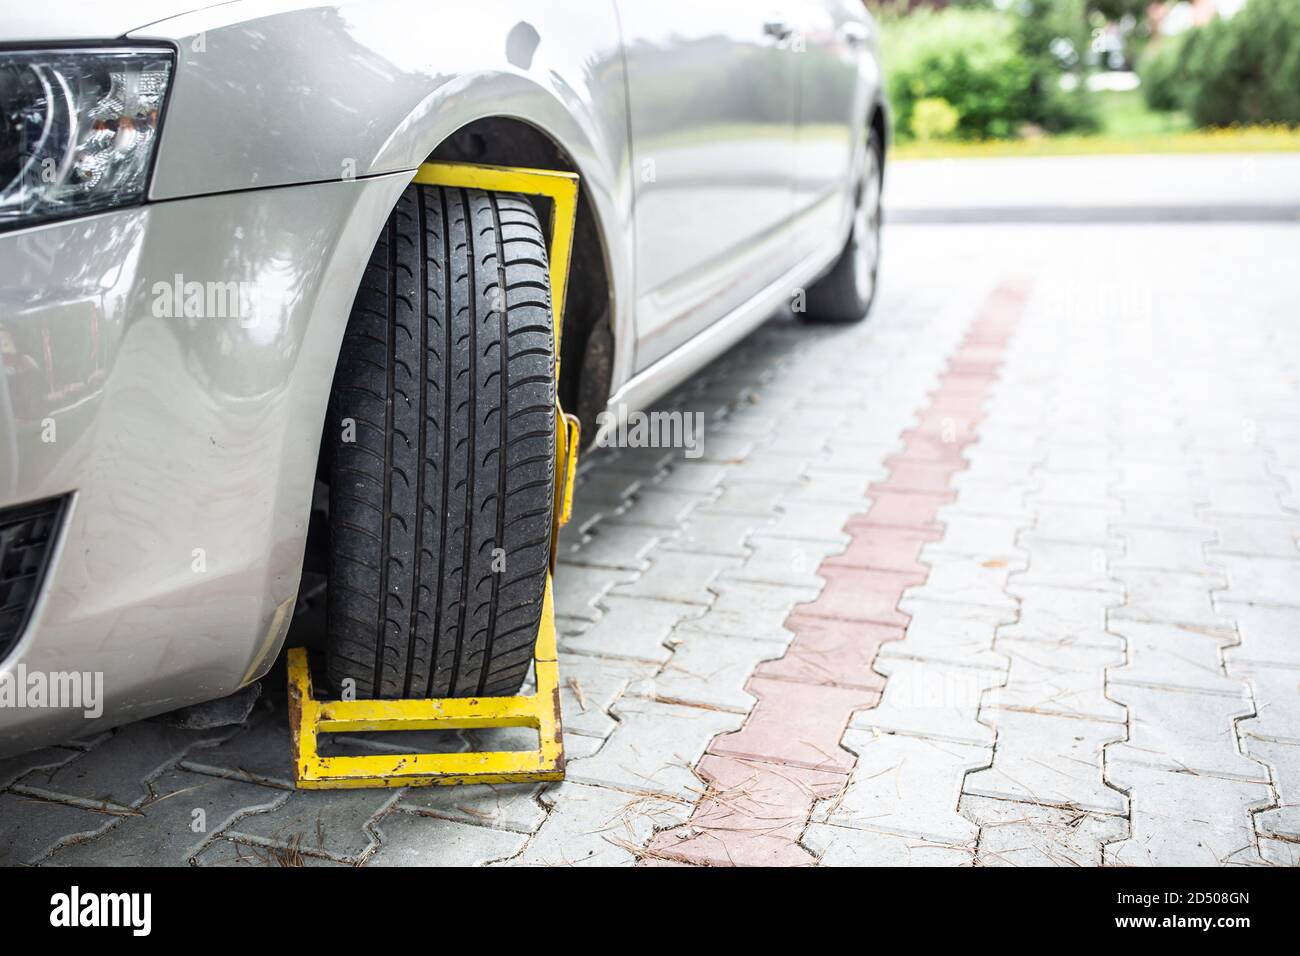 Yellow wheel clamp on an illegally parked car Stock Photo